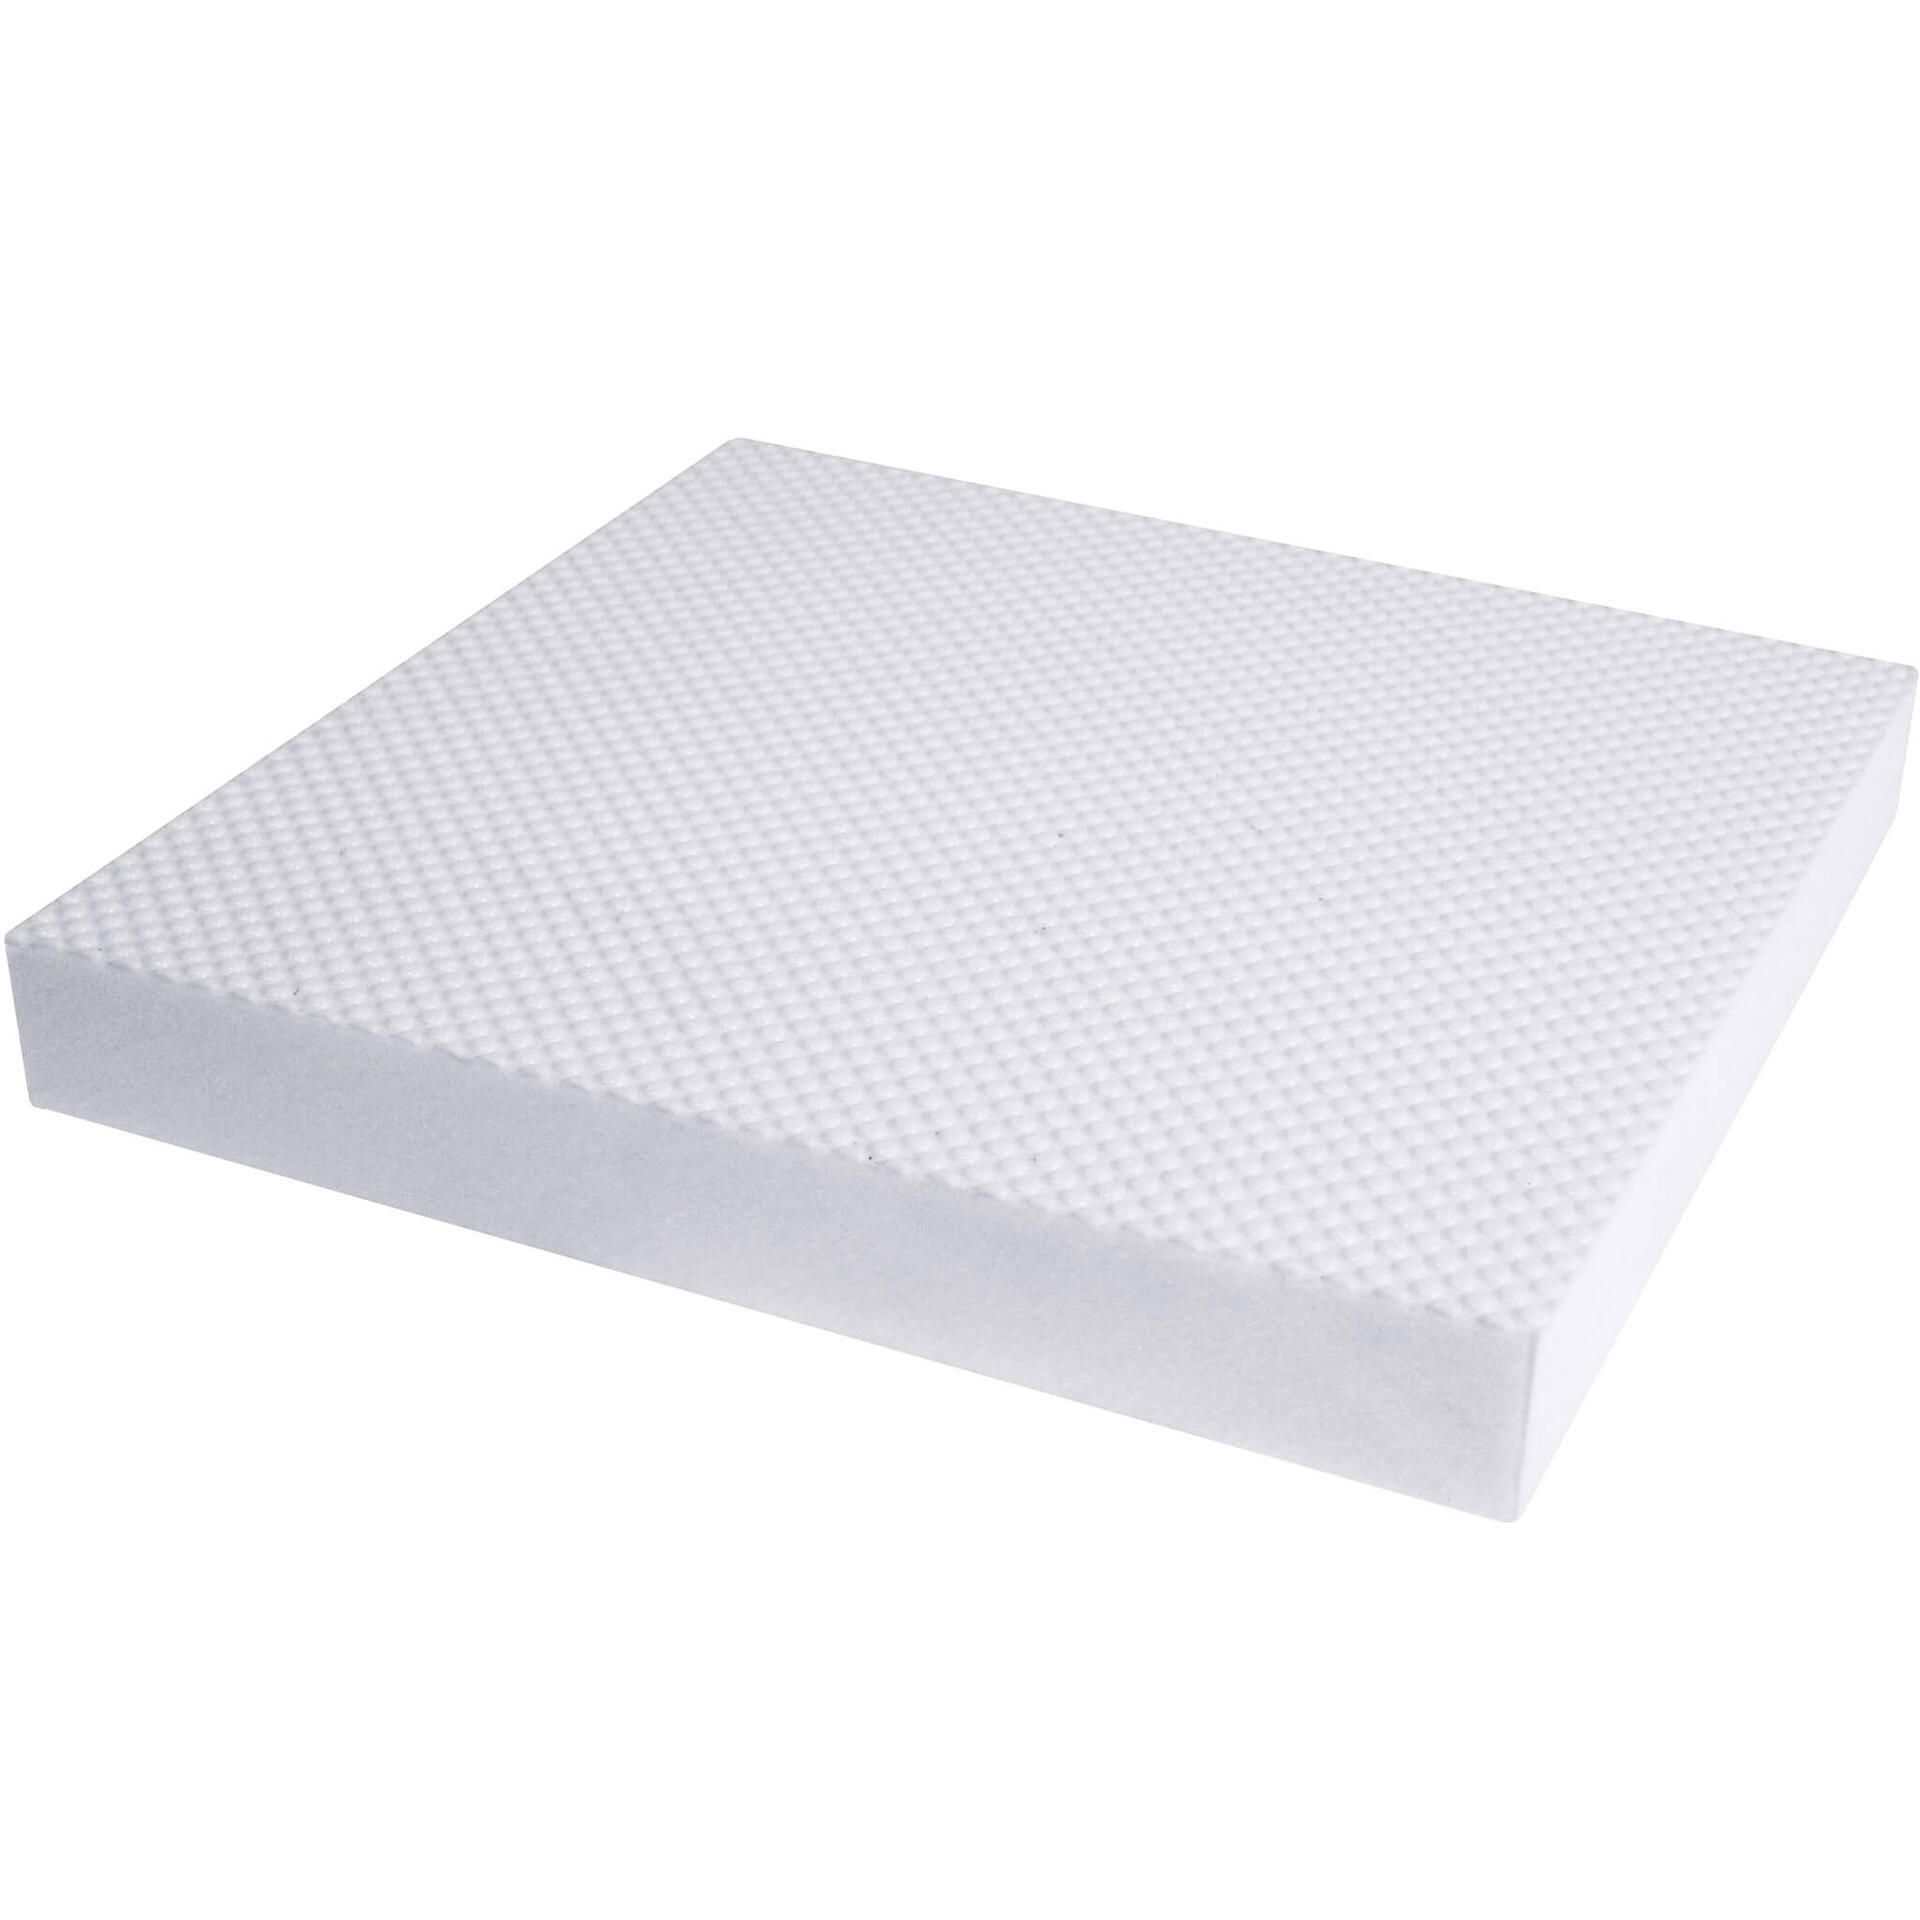 STARBOARD ST WHITE - SCRATCH RESISTANT ULTRA-STIFF BUILDING SHEET - Mobile